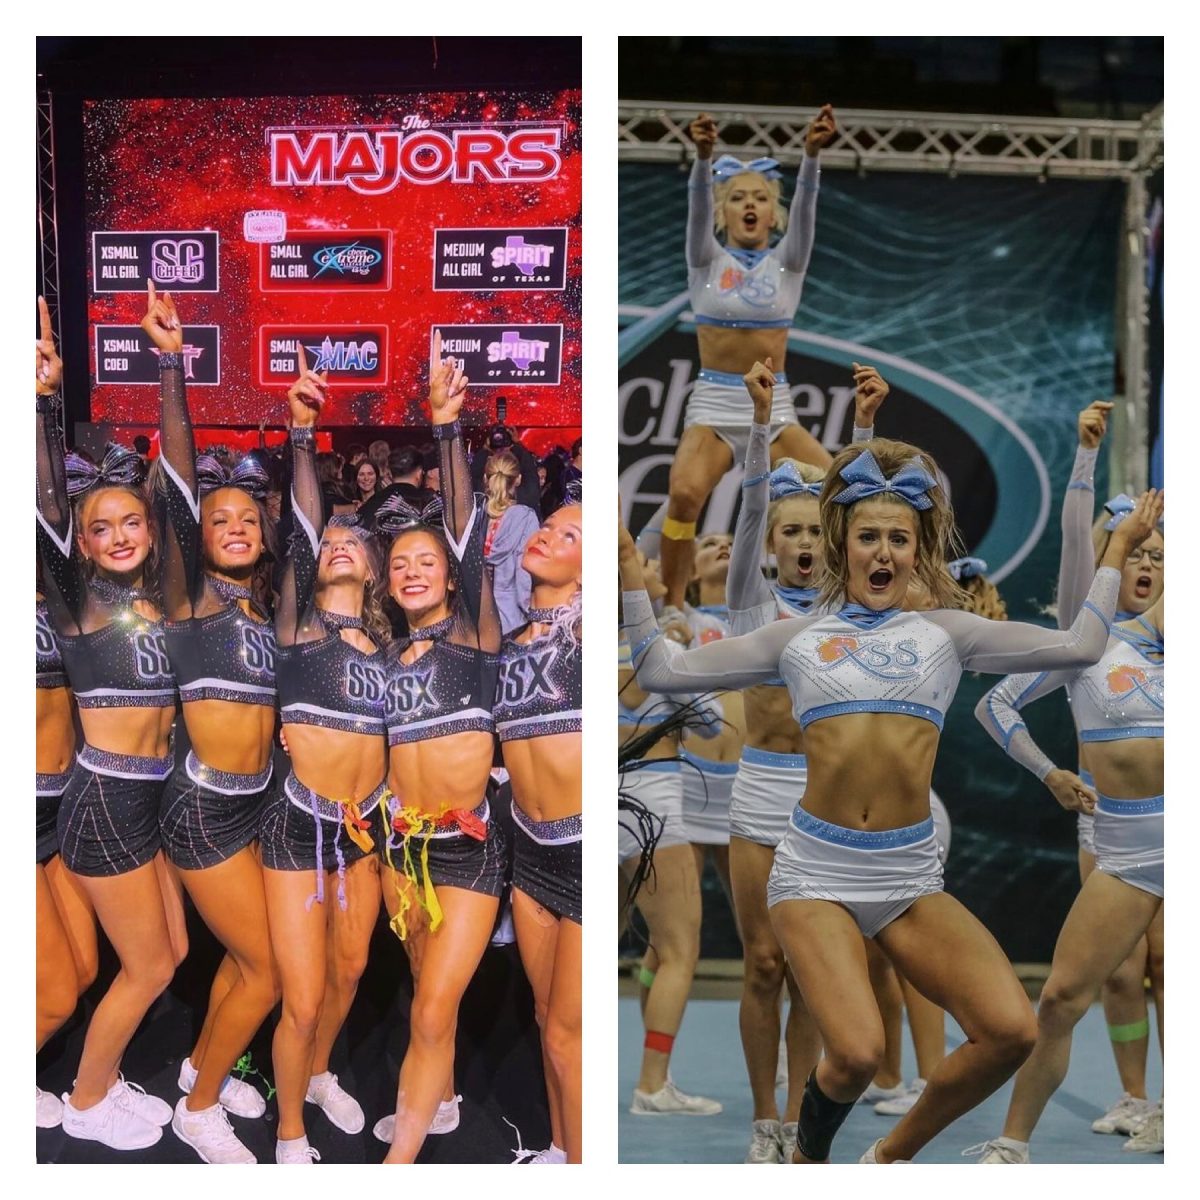 from 
cea.xss on instagram
and
ssx_sharks on instagram